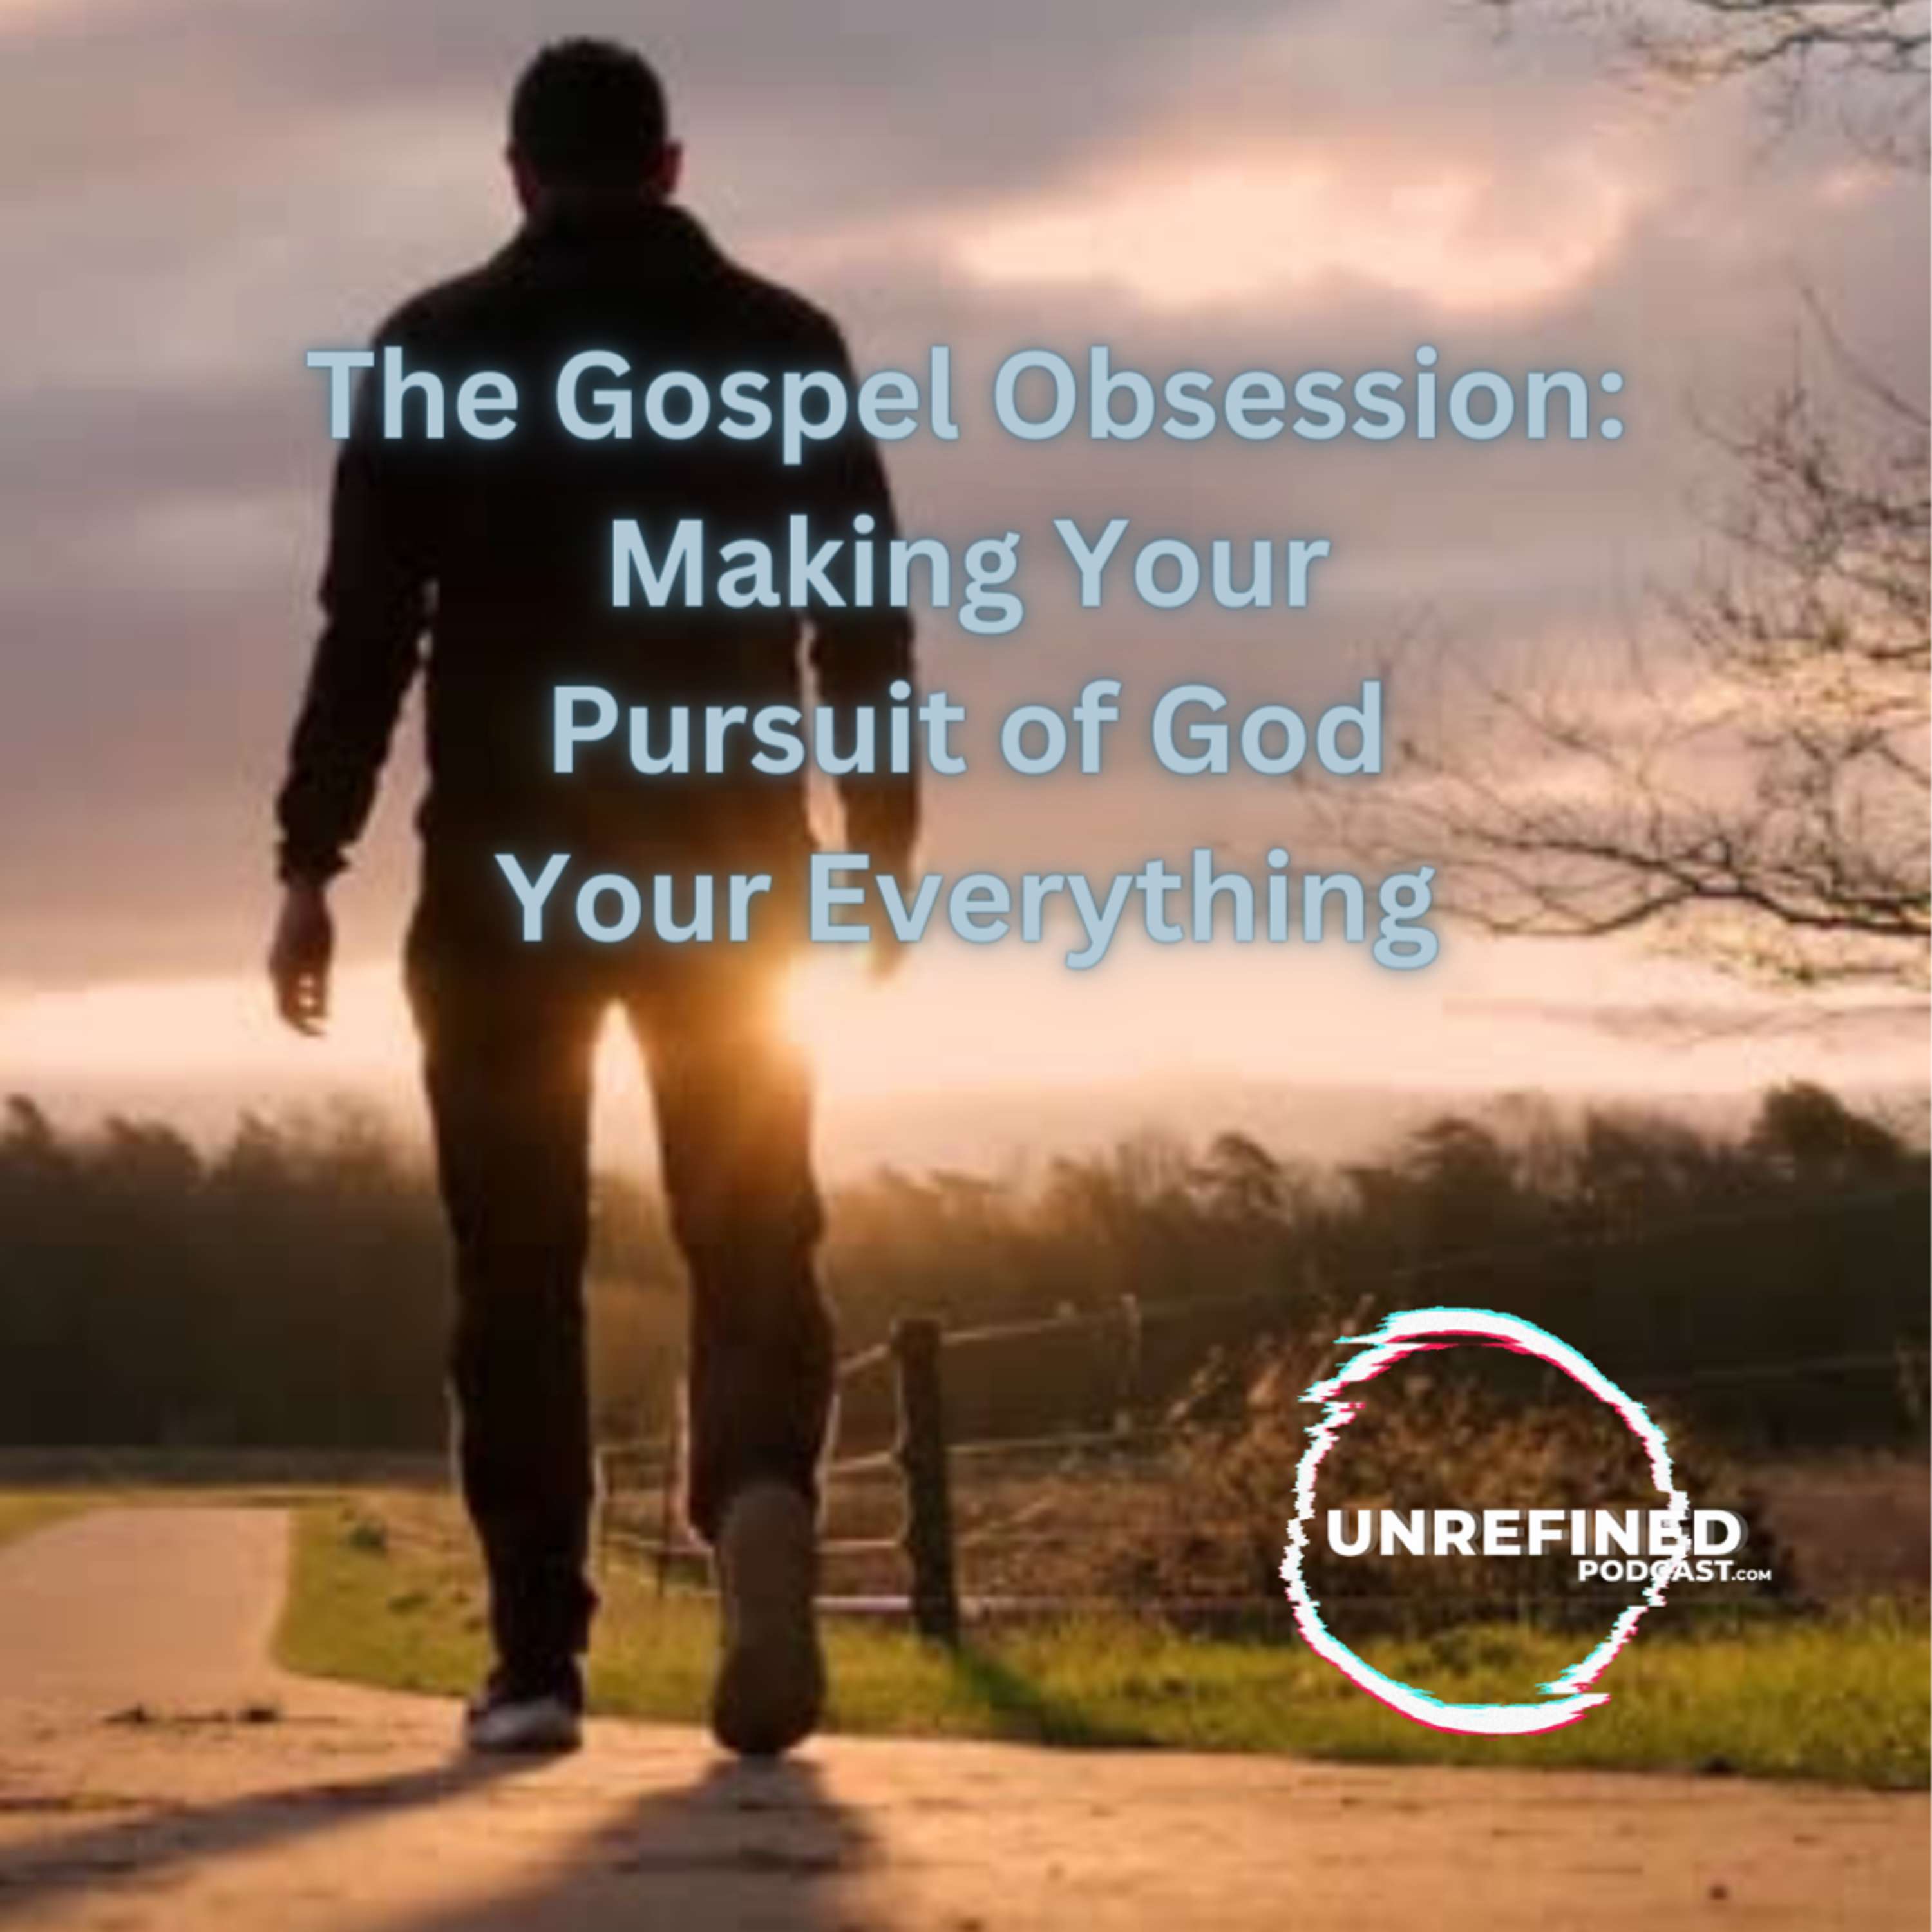 The Gospel Obsession: Making Your Pursuit of God Your Everything